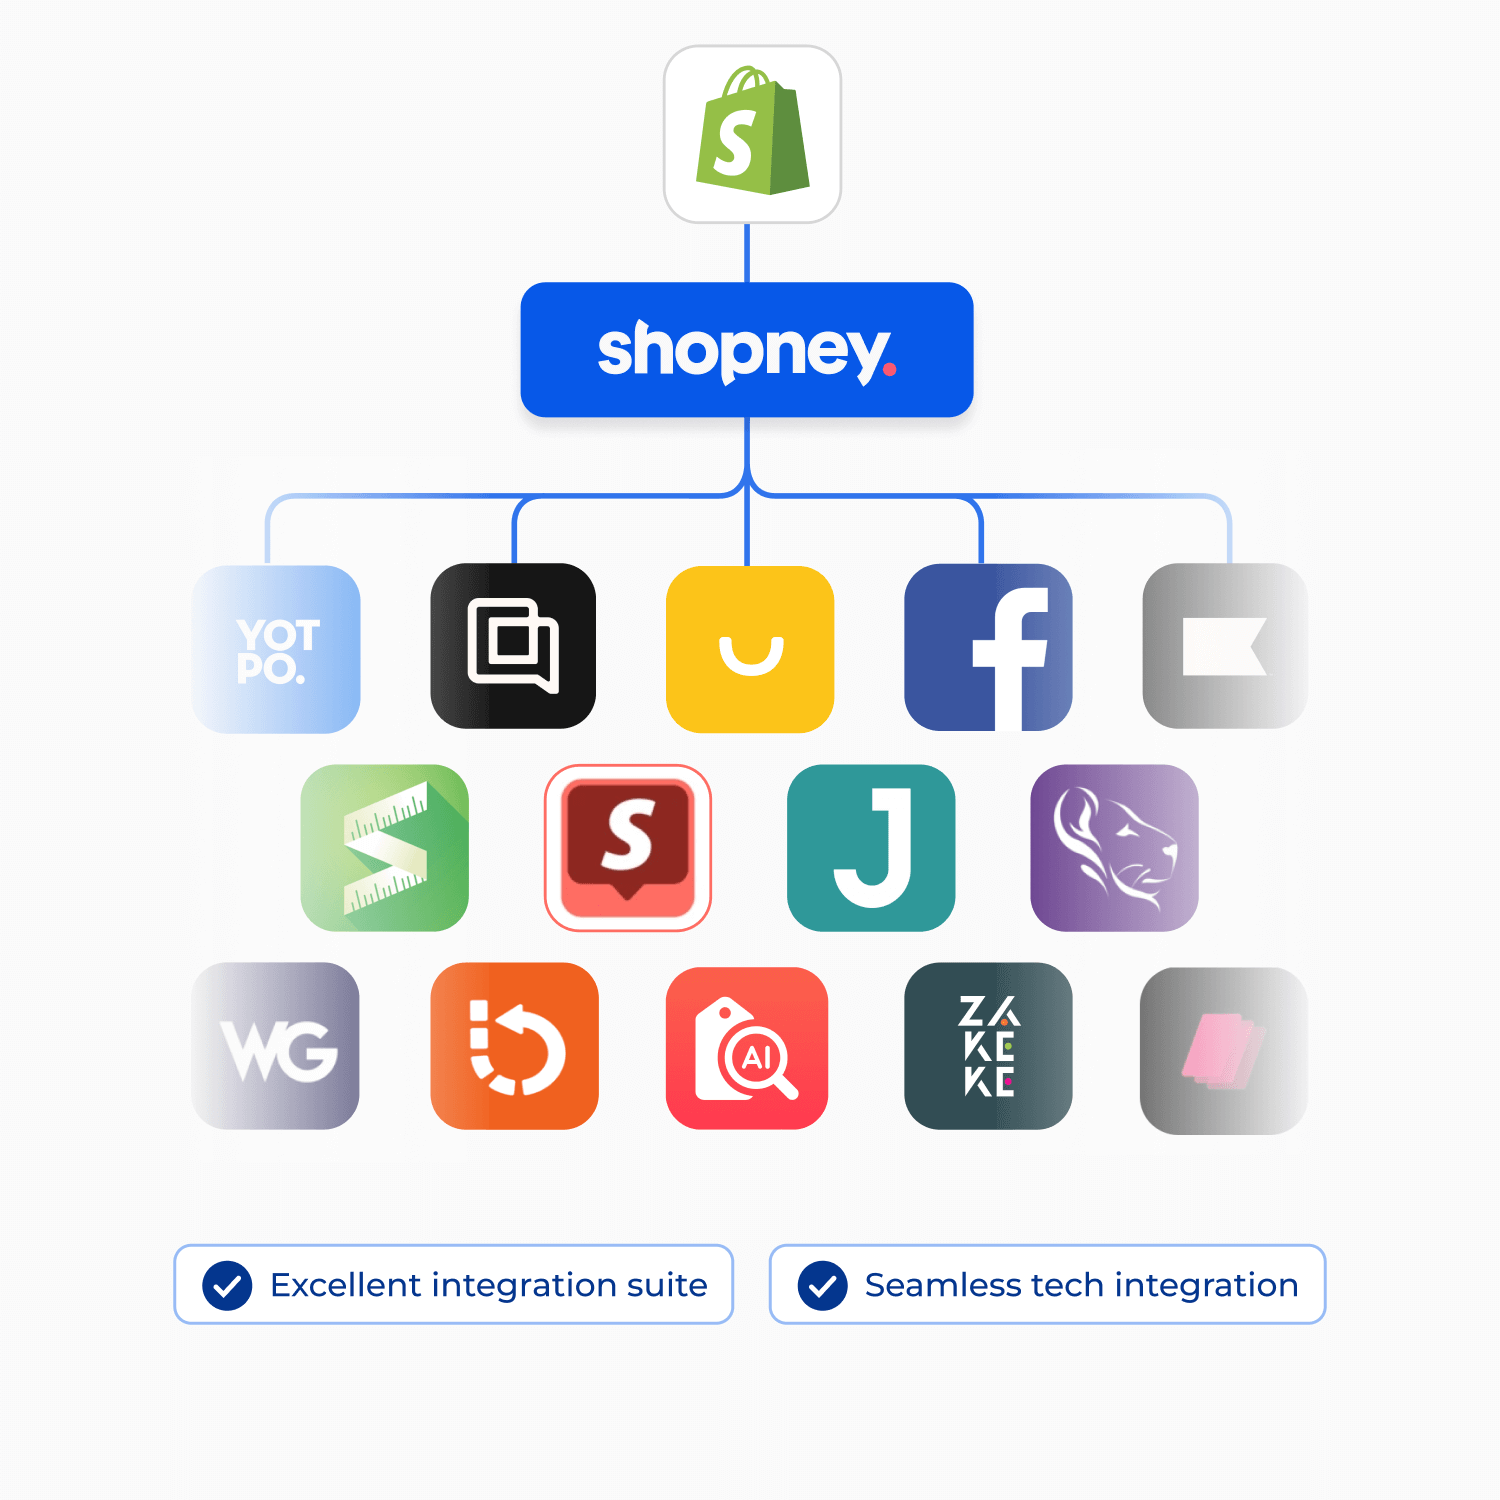 The Shopify apps integrated with Shopney